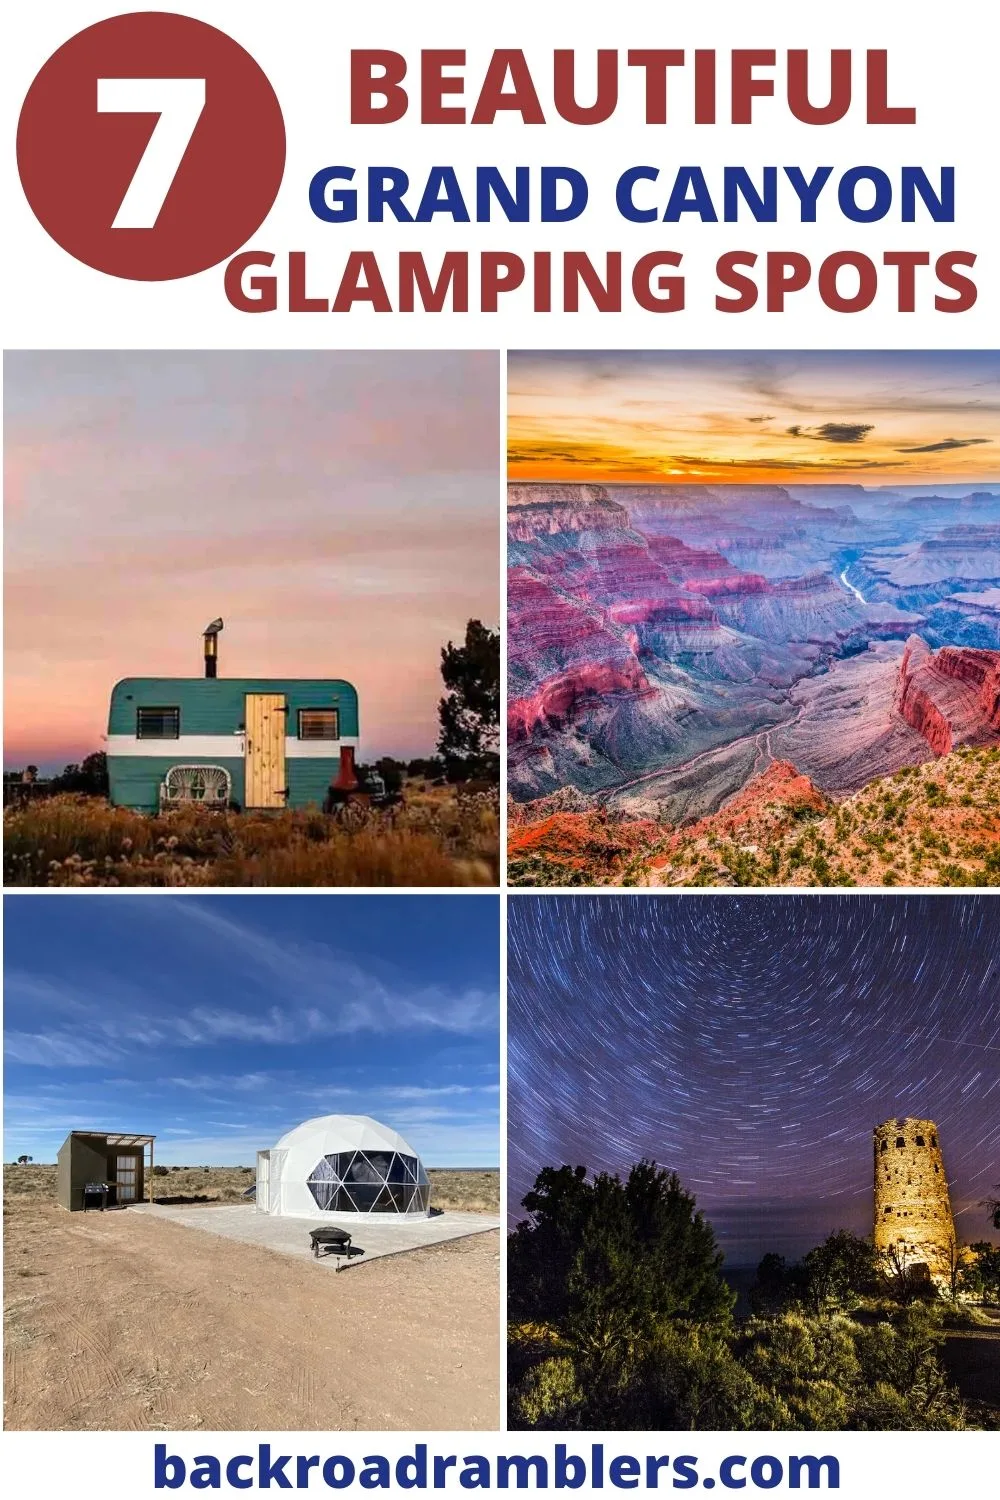 A collage of photos featuring glamping Grand Canyon properties, all just a short drive from the South Rim. Text Overlay: 7 Beautiful Grand Canyon Glamping Spots.